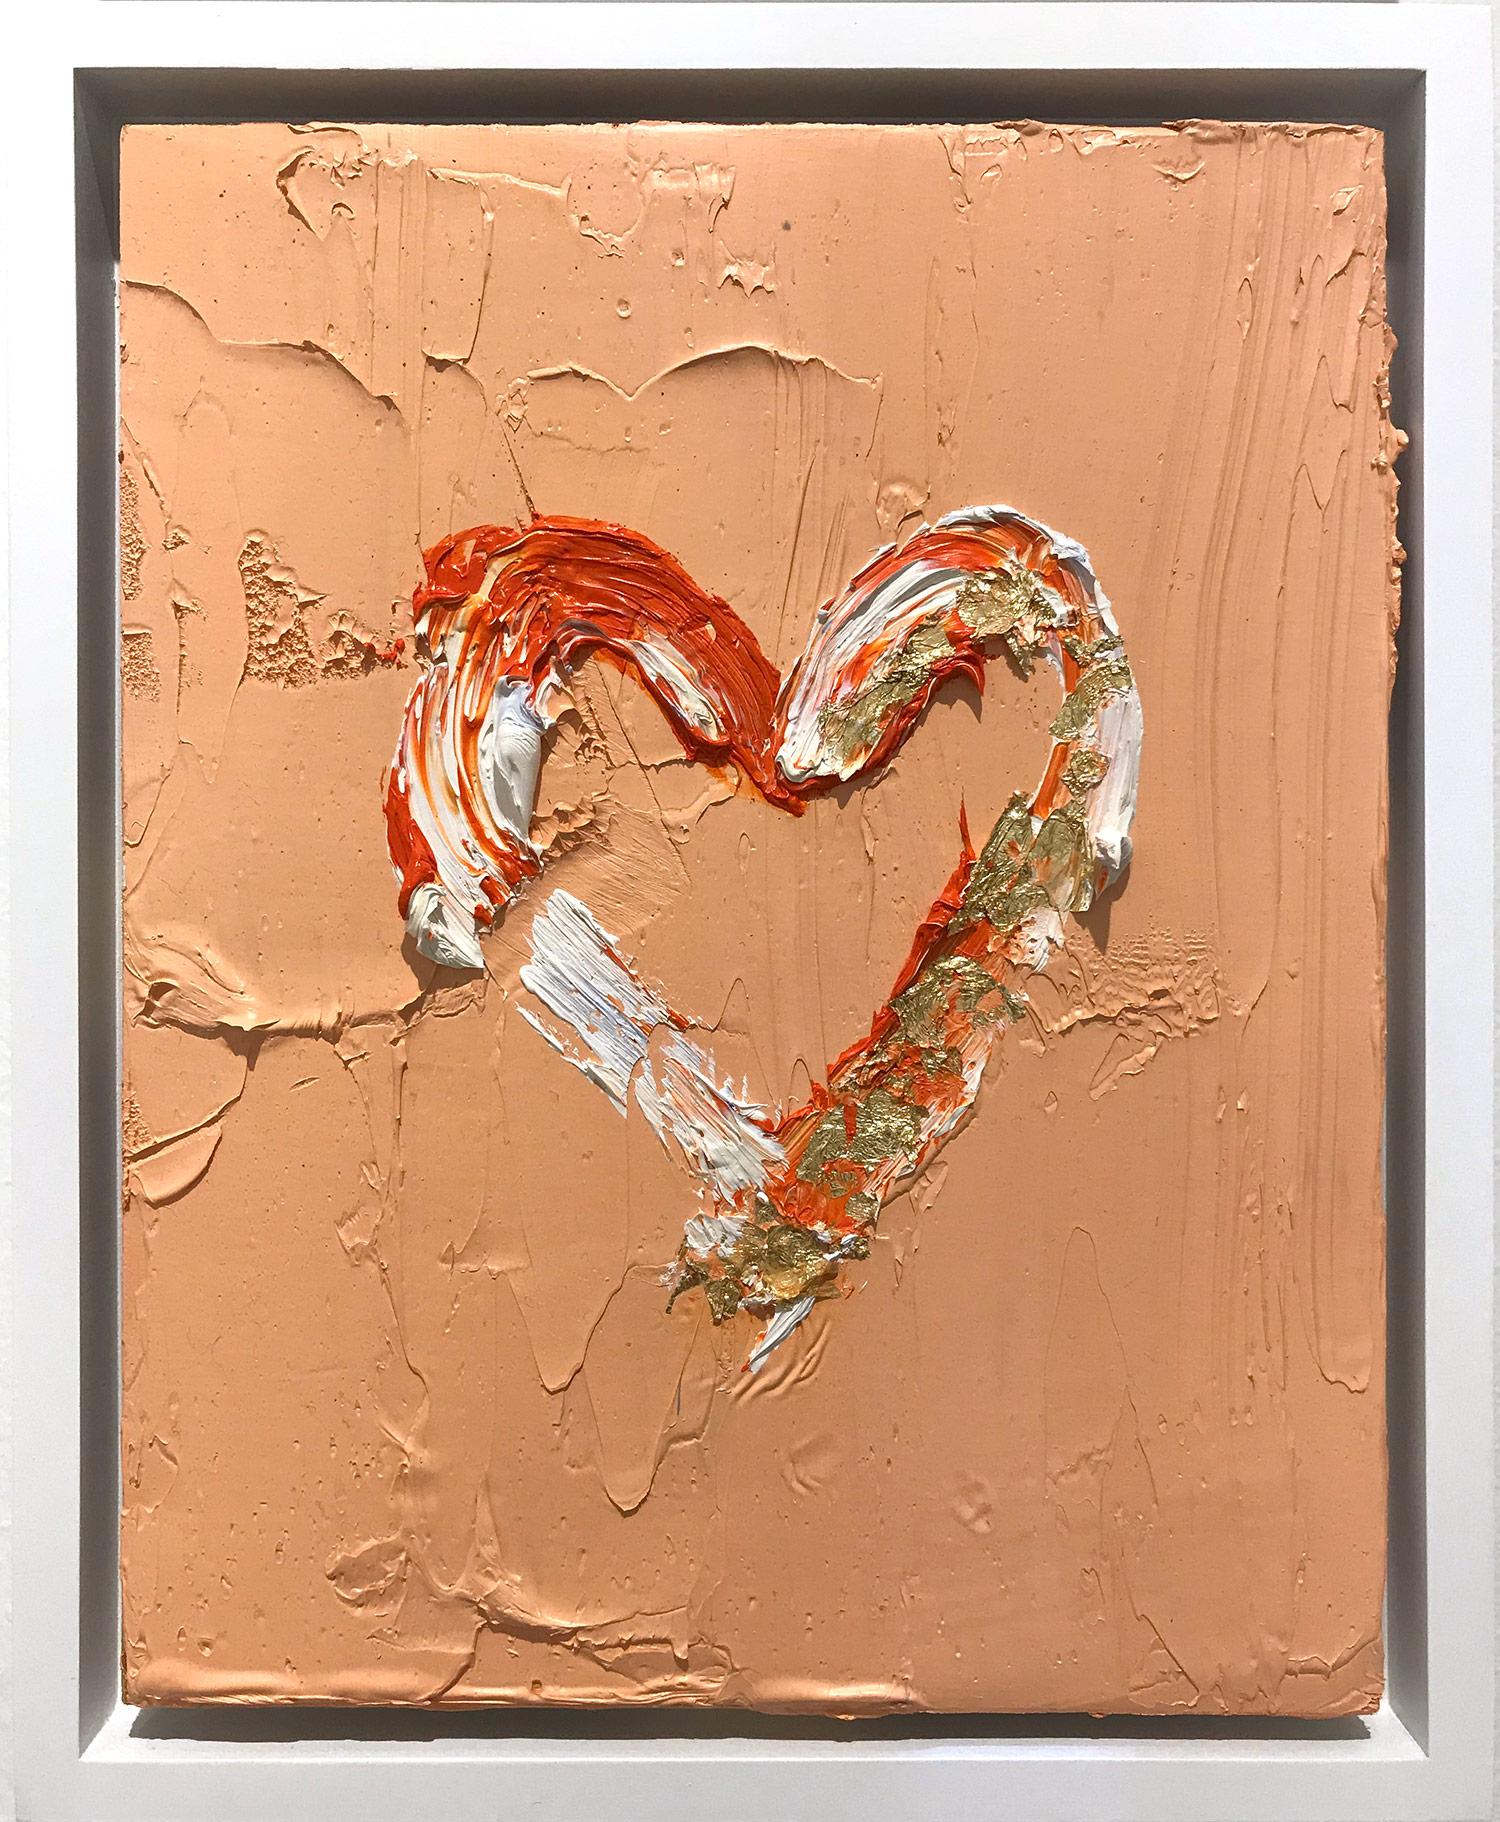 Cindy Shaoul Figurative Painting - "My Heart on Peach & Gold" Contemporary Oil Painting Framed w Floater Frame